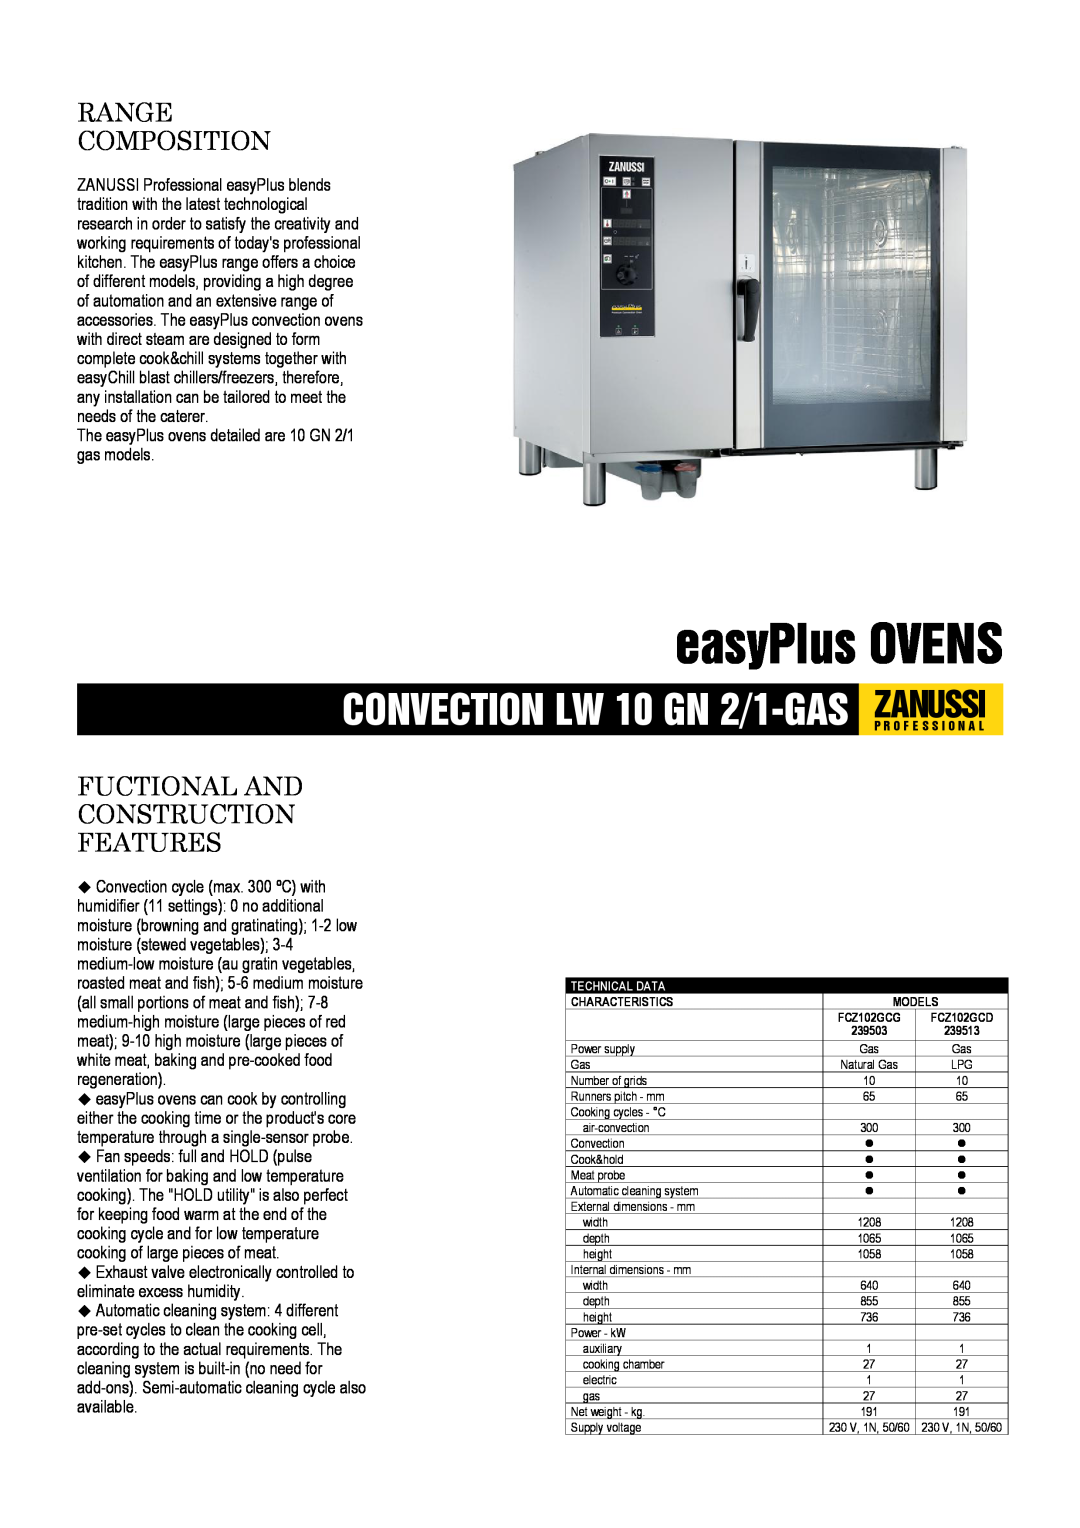 Zanussi FCZ102GCG, FCZ102GCD, 239503 dimensions easyPlus OVENS, Range Composition, Fuctional And Construction Features 